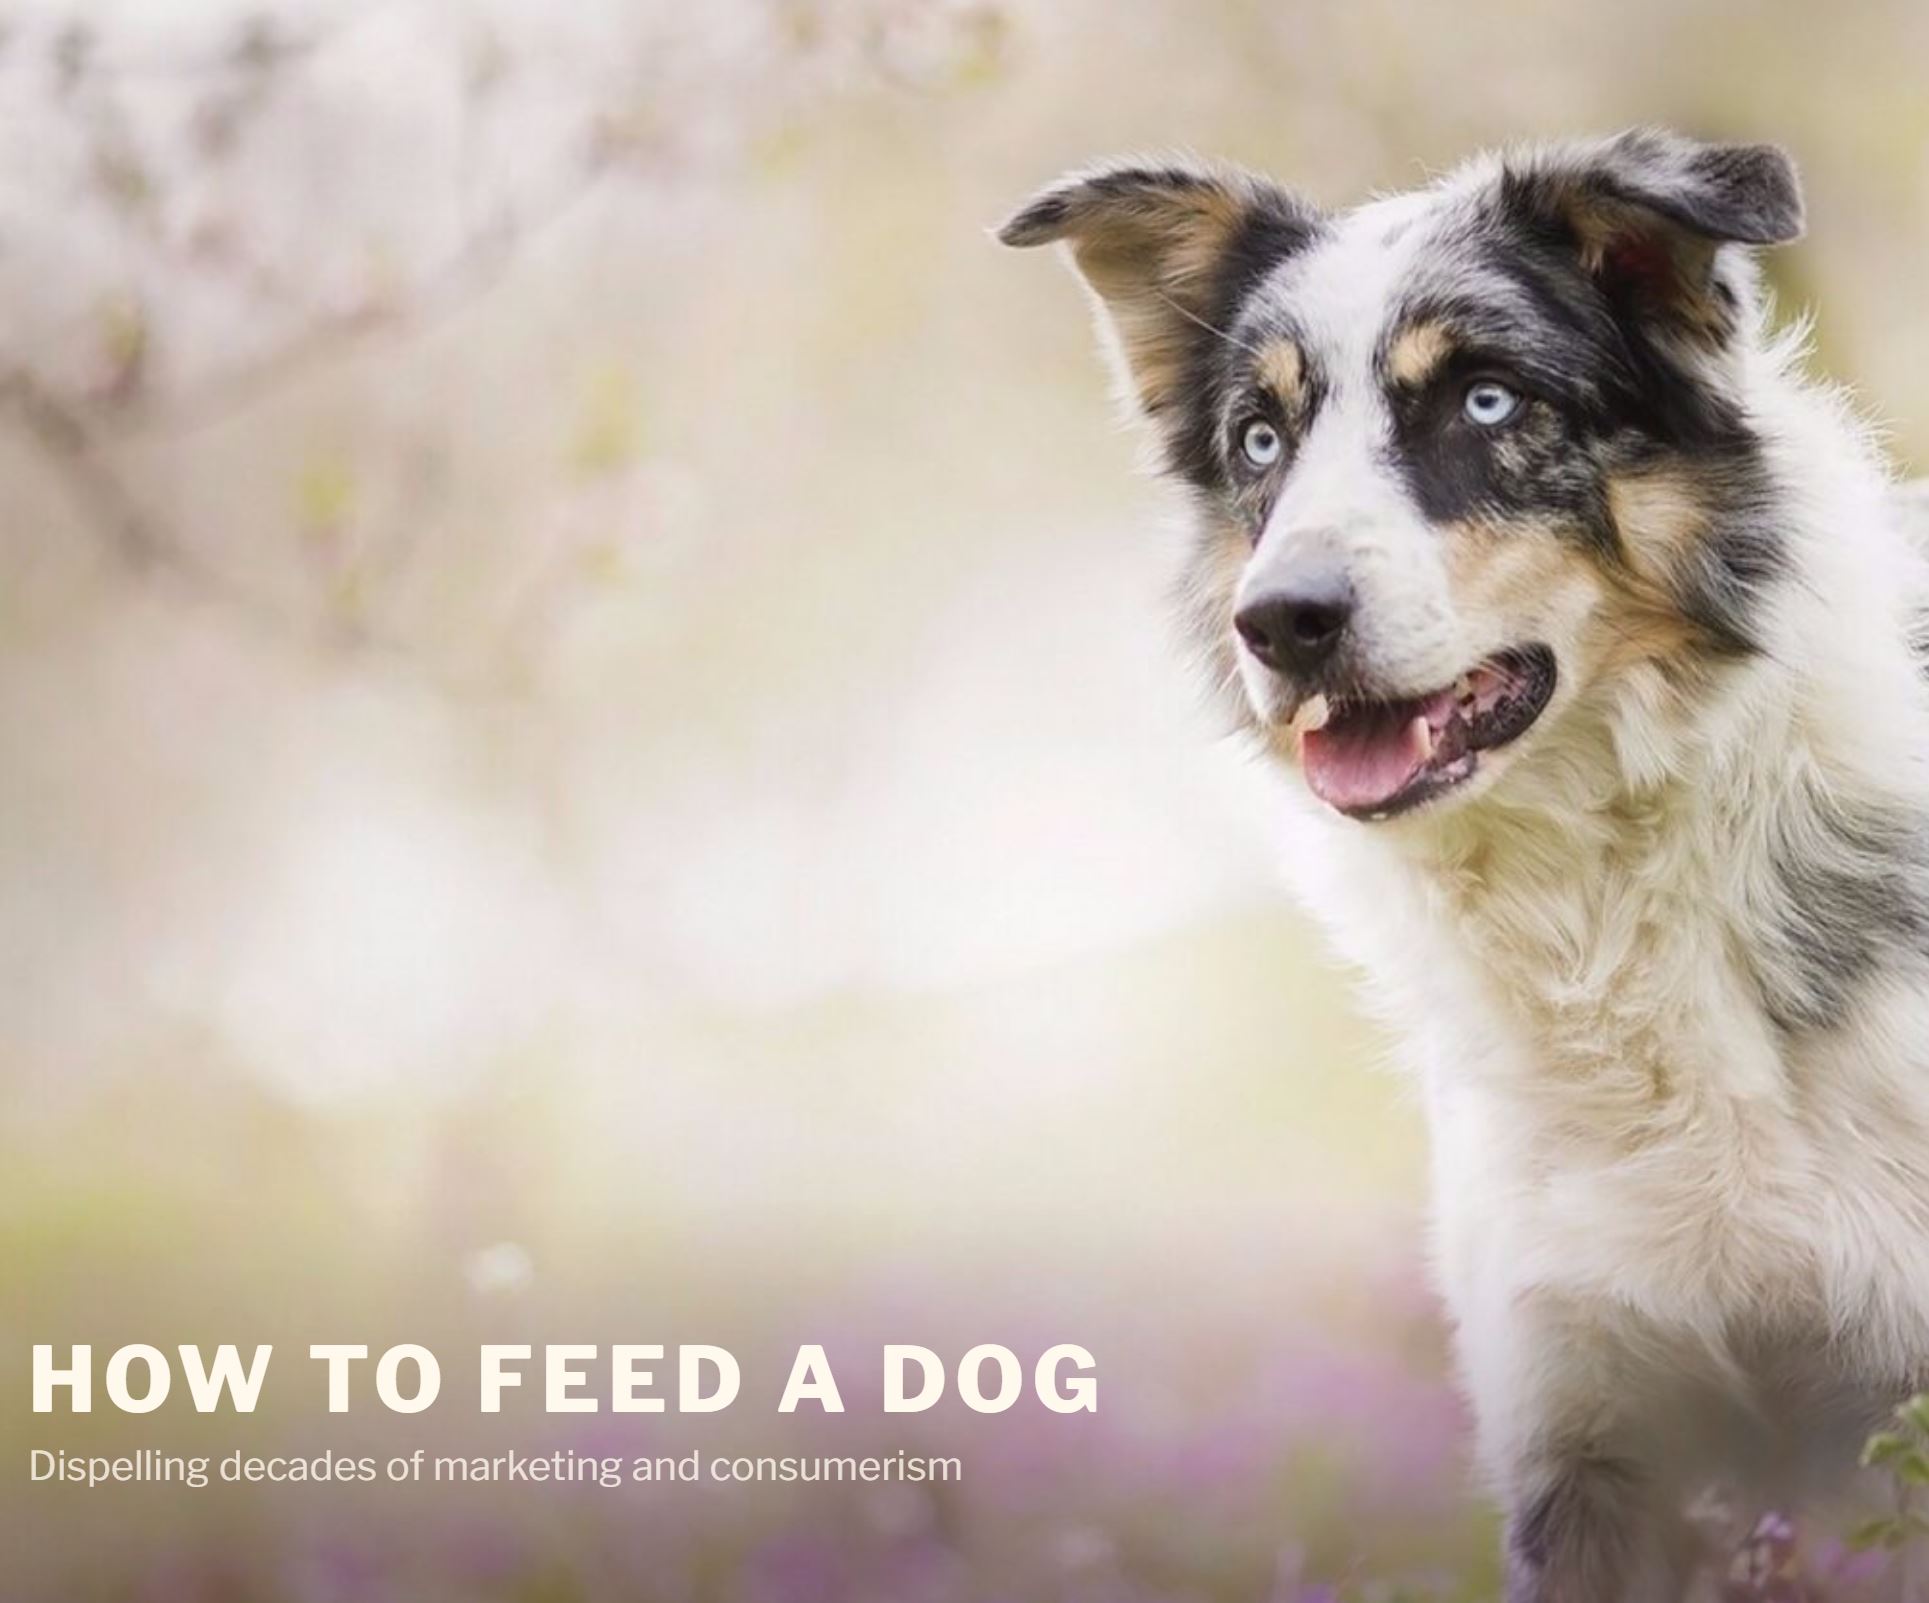 A guide on how to feed a dog (or cat)